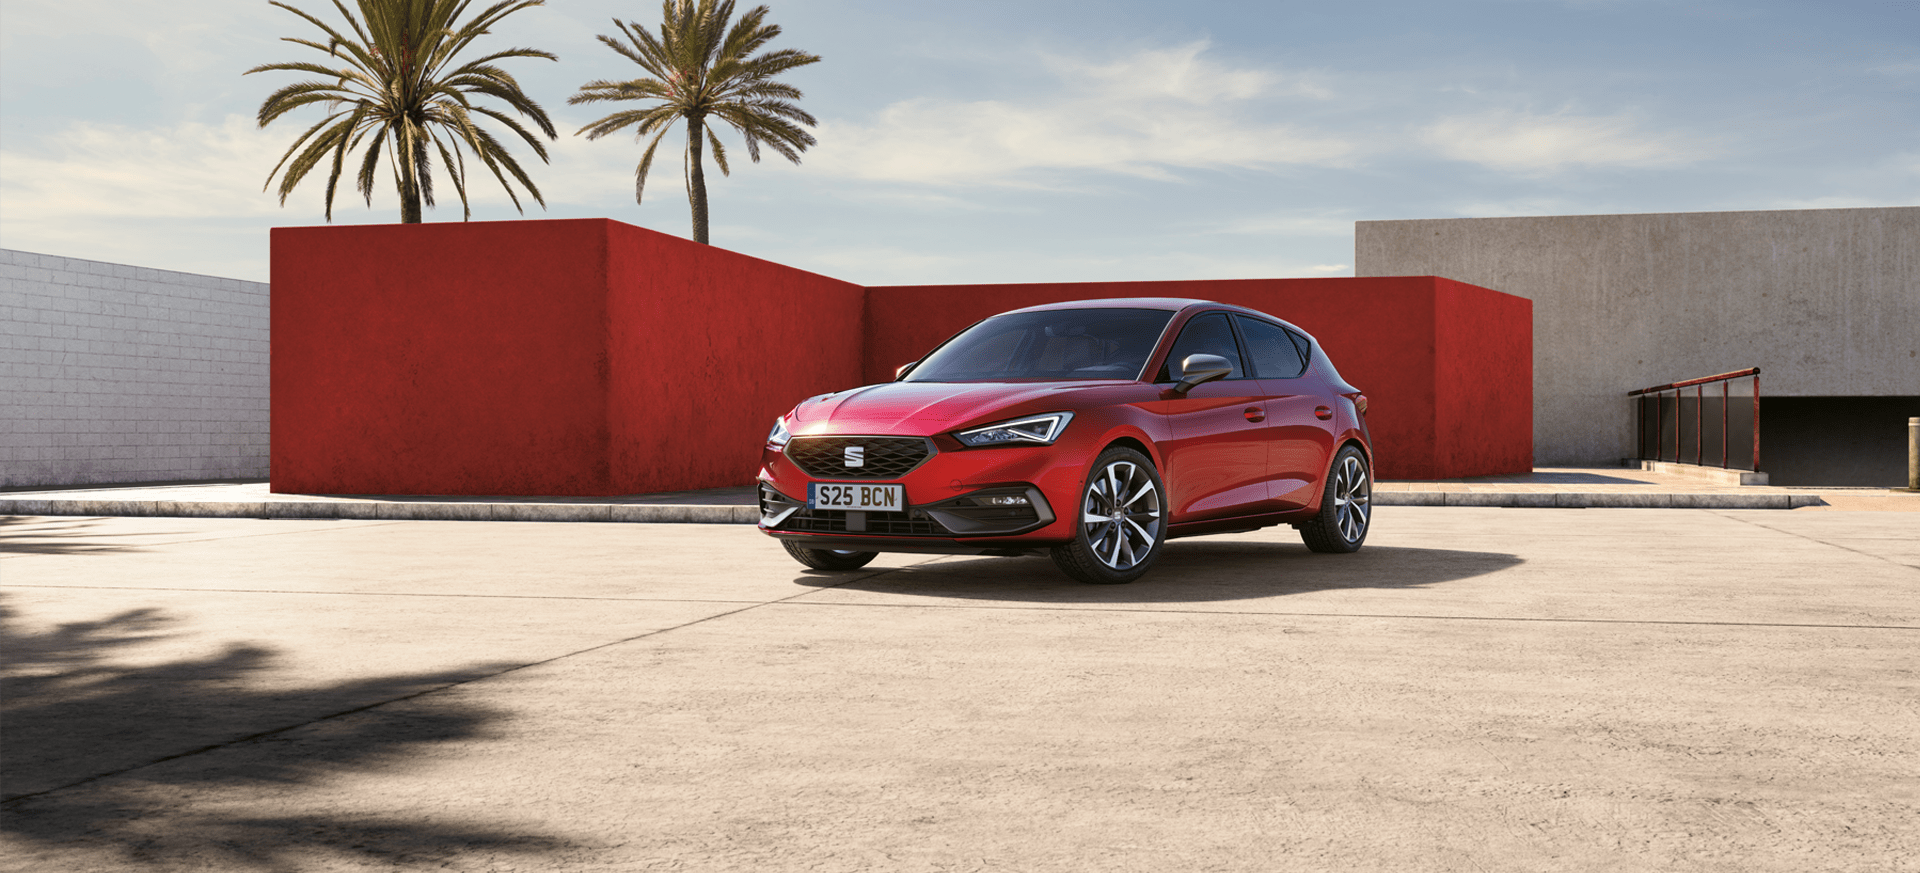 NEW SEAT Leon at Bannerman SEAT Inverness